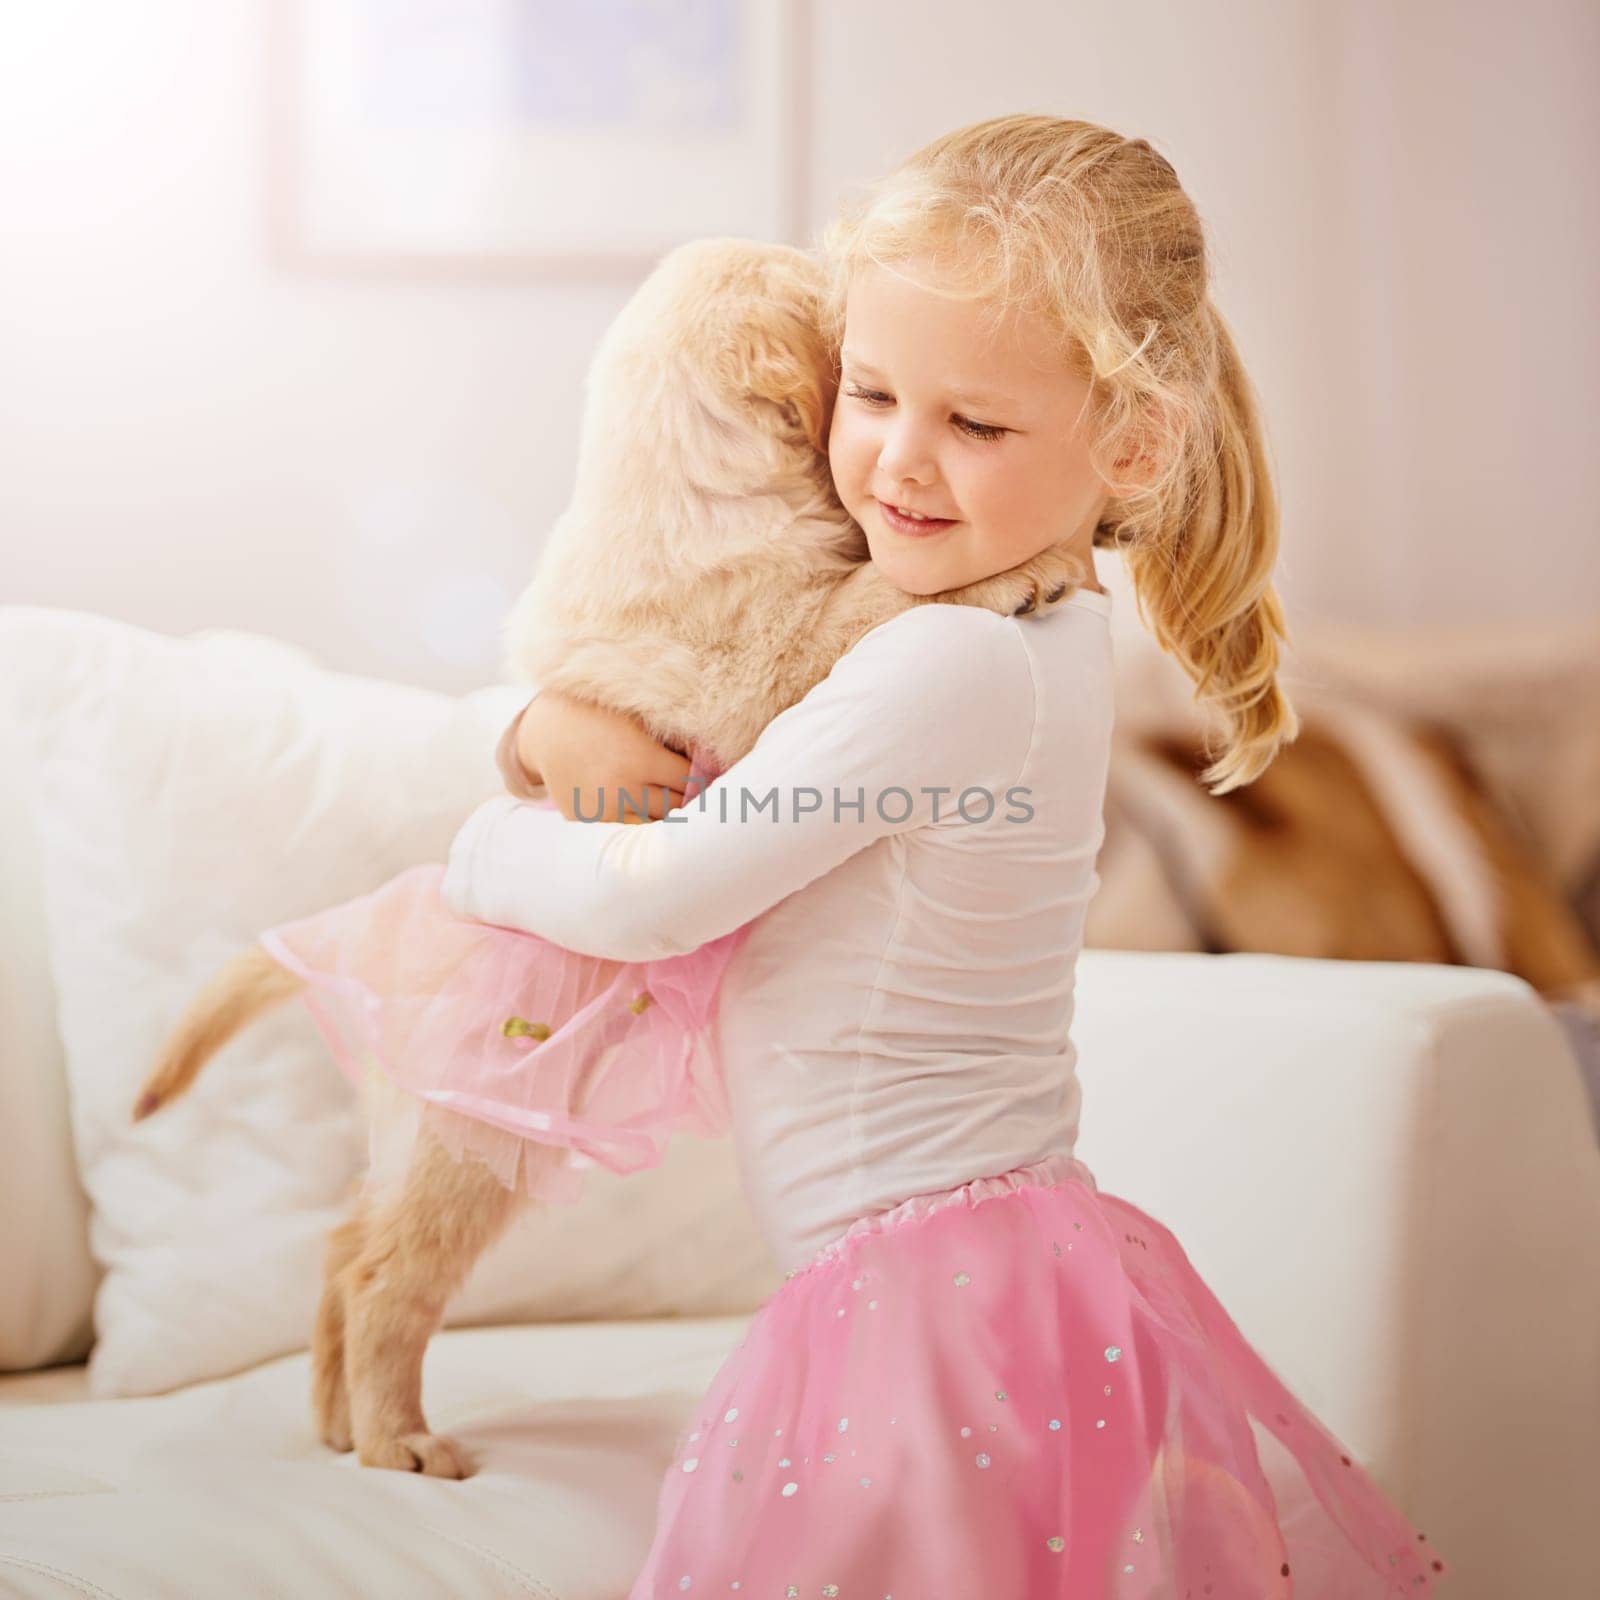 Child, golden retriever or dog in a house to hug for love, care and development. Face of a cute girl kid and animal puppy or pet in a tutu playing together as friends on the lounge sofa for happiness.